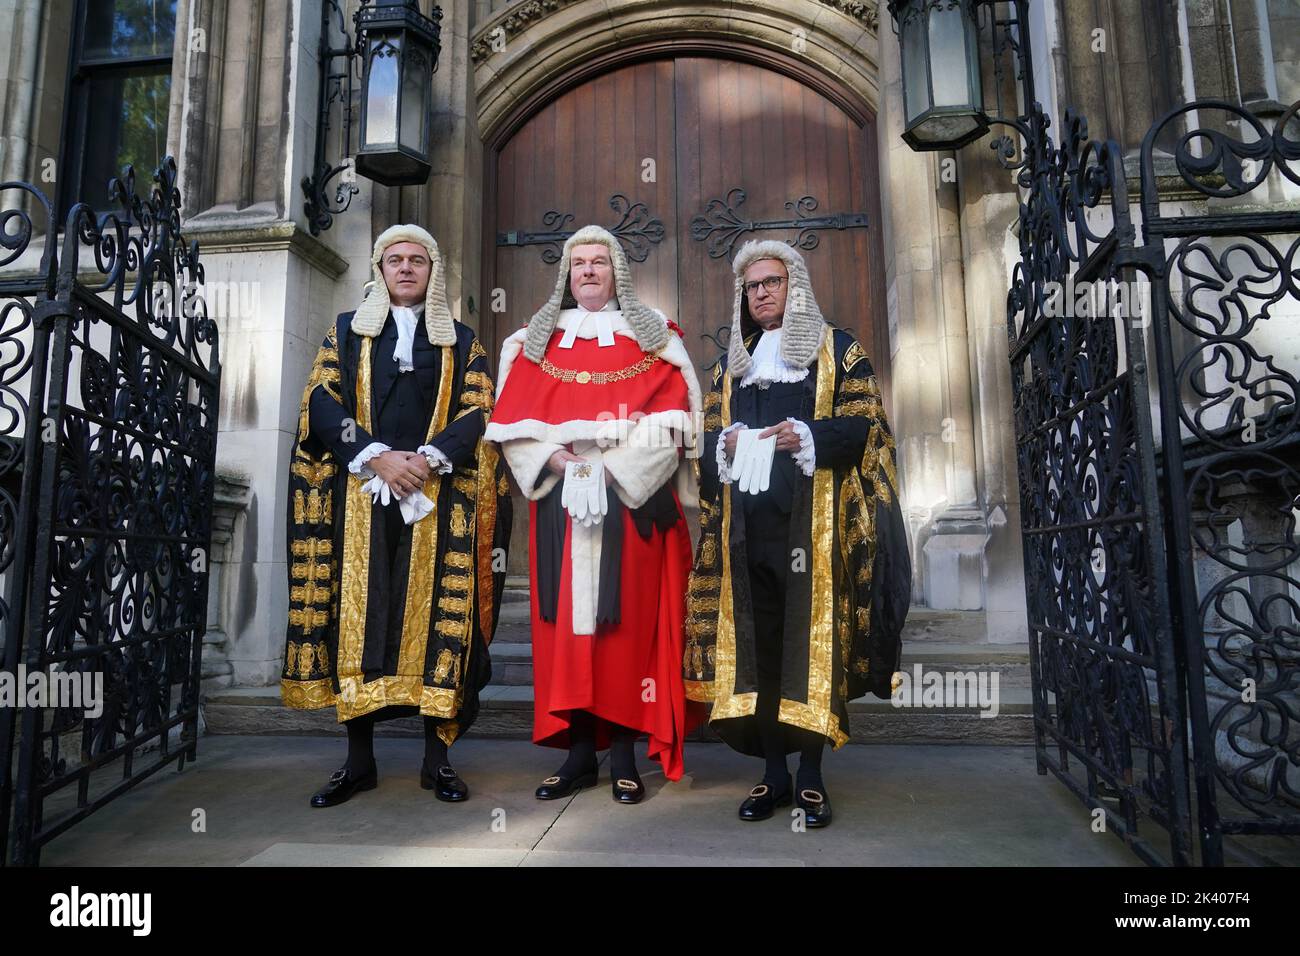 (left to right) Justice Secretary Brandon Lewis, alongside Lord Chief Justice Lord Burnett and Master of the Rolls Sir Geoffrey Vos, at the Royal Courts of Justice, in central London, ahead of his swearing in ceremony as Lord Chancellor. Picture date: Thursday September 29, 2022. Stock Photo